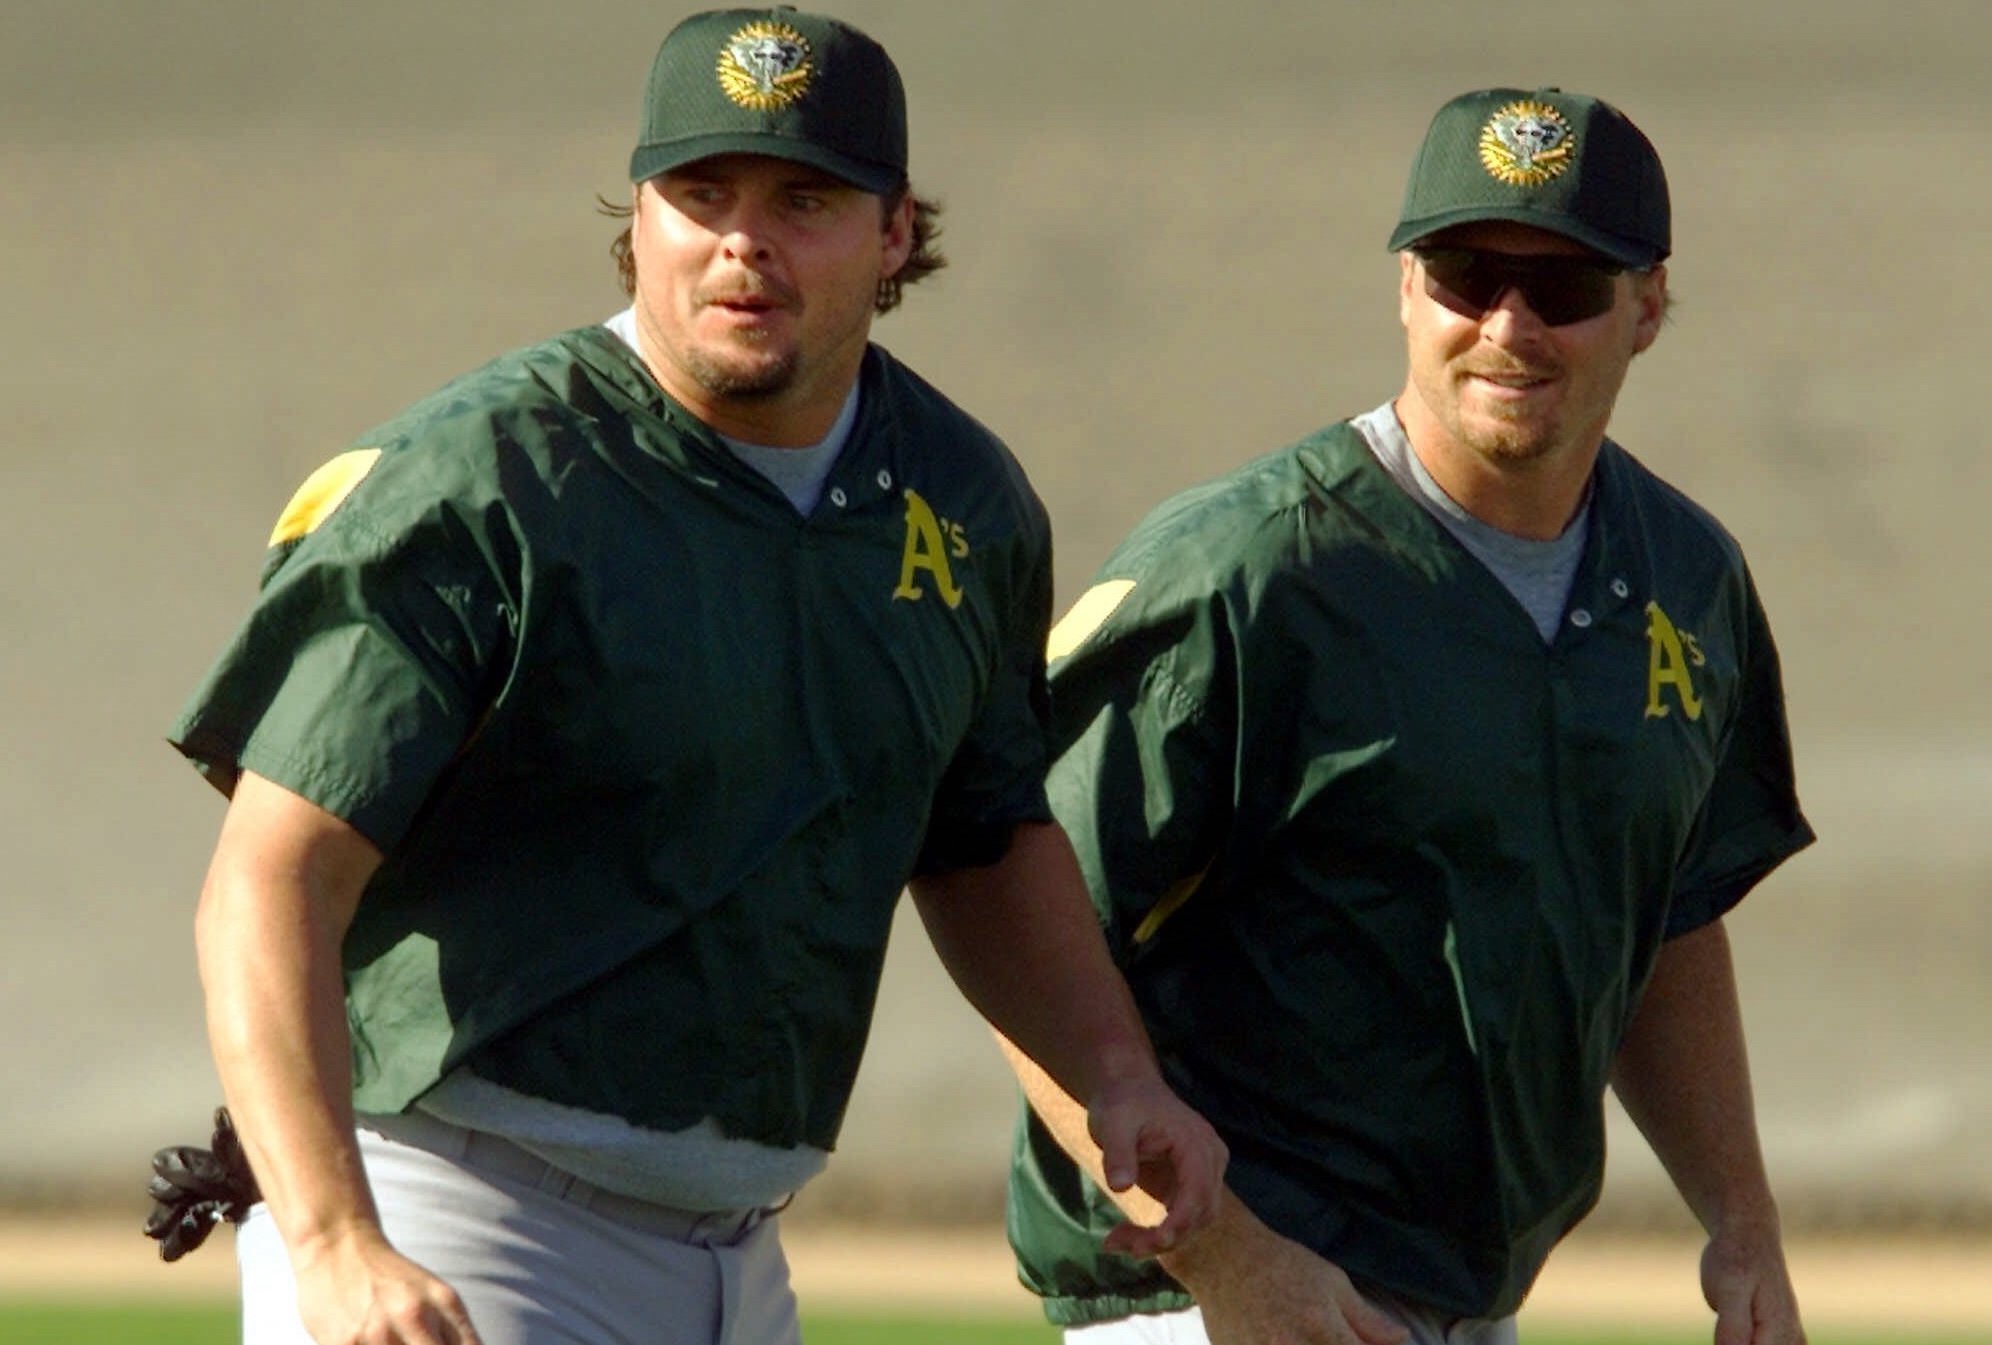 Key new detail revealed in the death of Jeremy Giambi, brother of